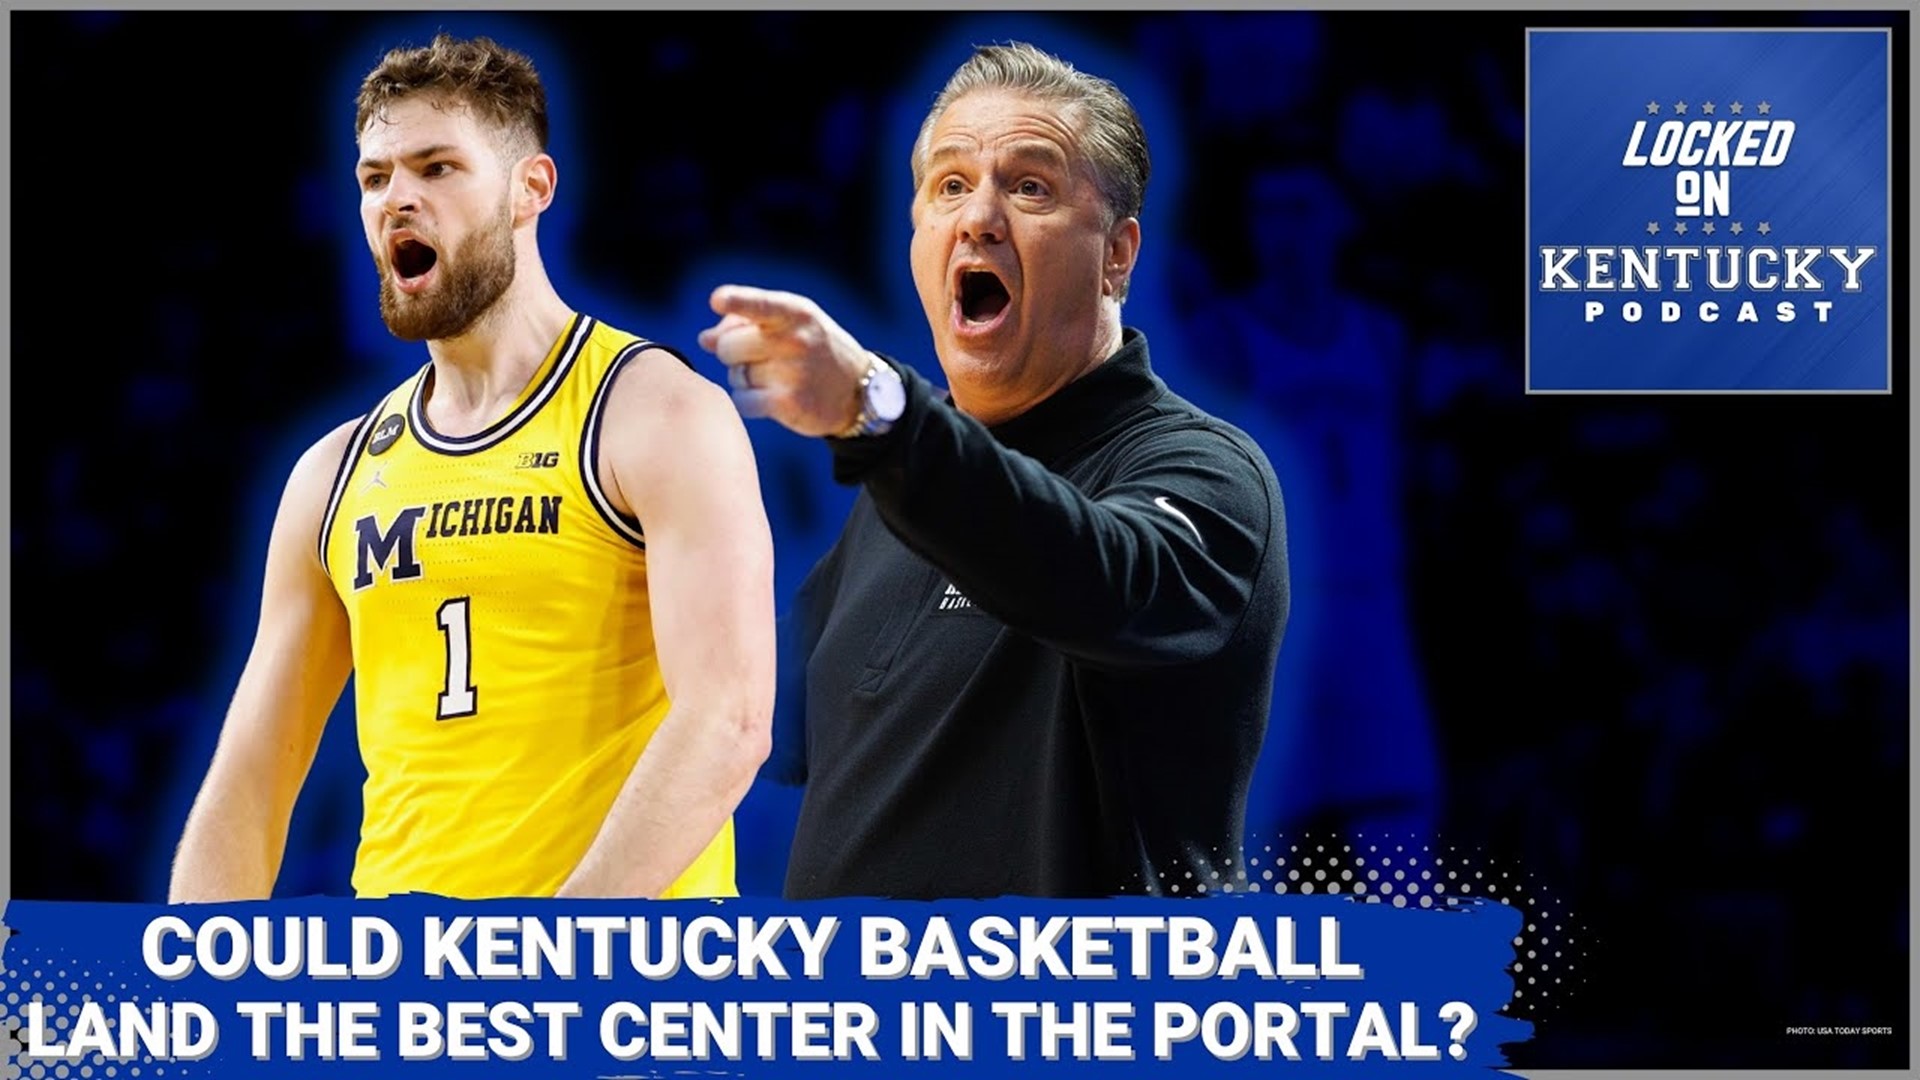 Michigan center and All-American Hunter Dickinson just entered the transfer portal... and the Kentucky Wildcats were immediately mentioned as a potential destination